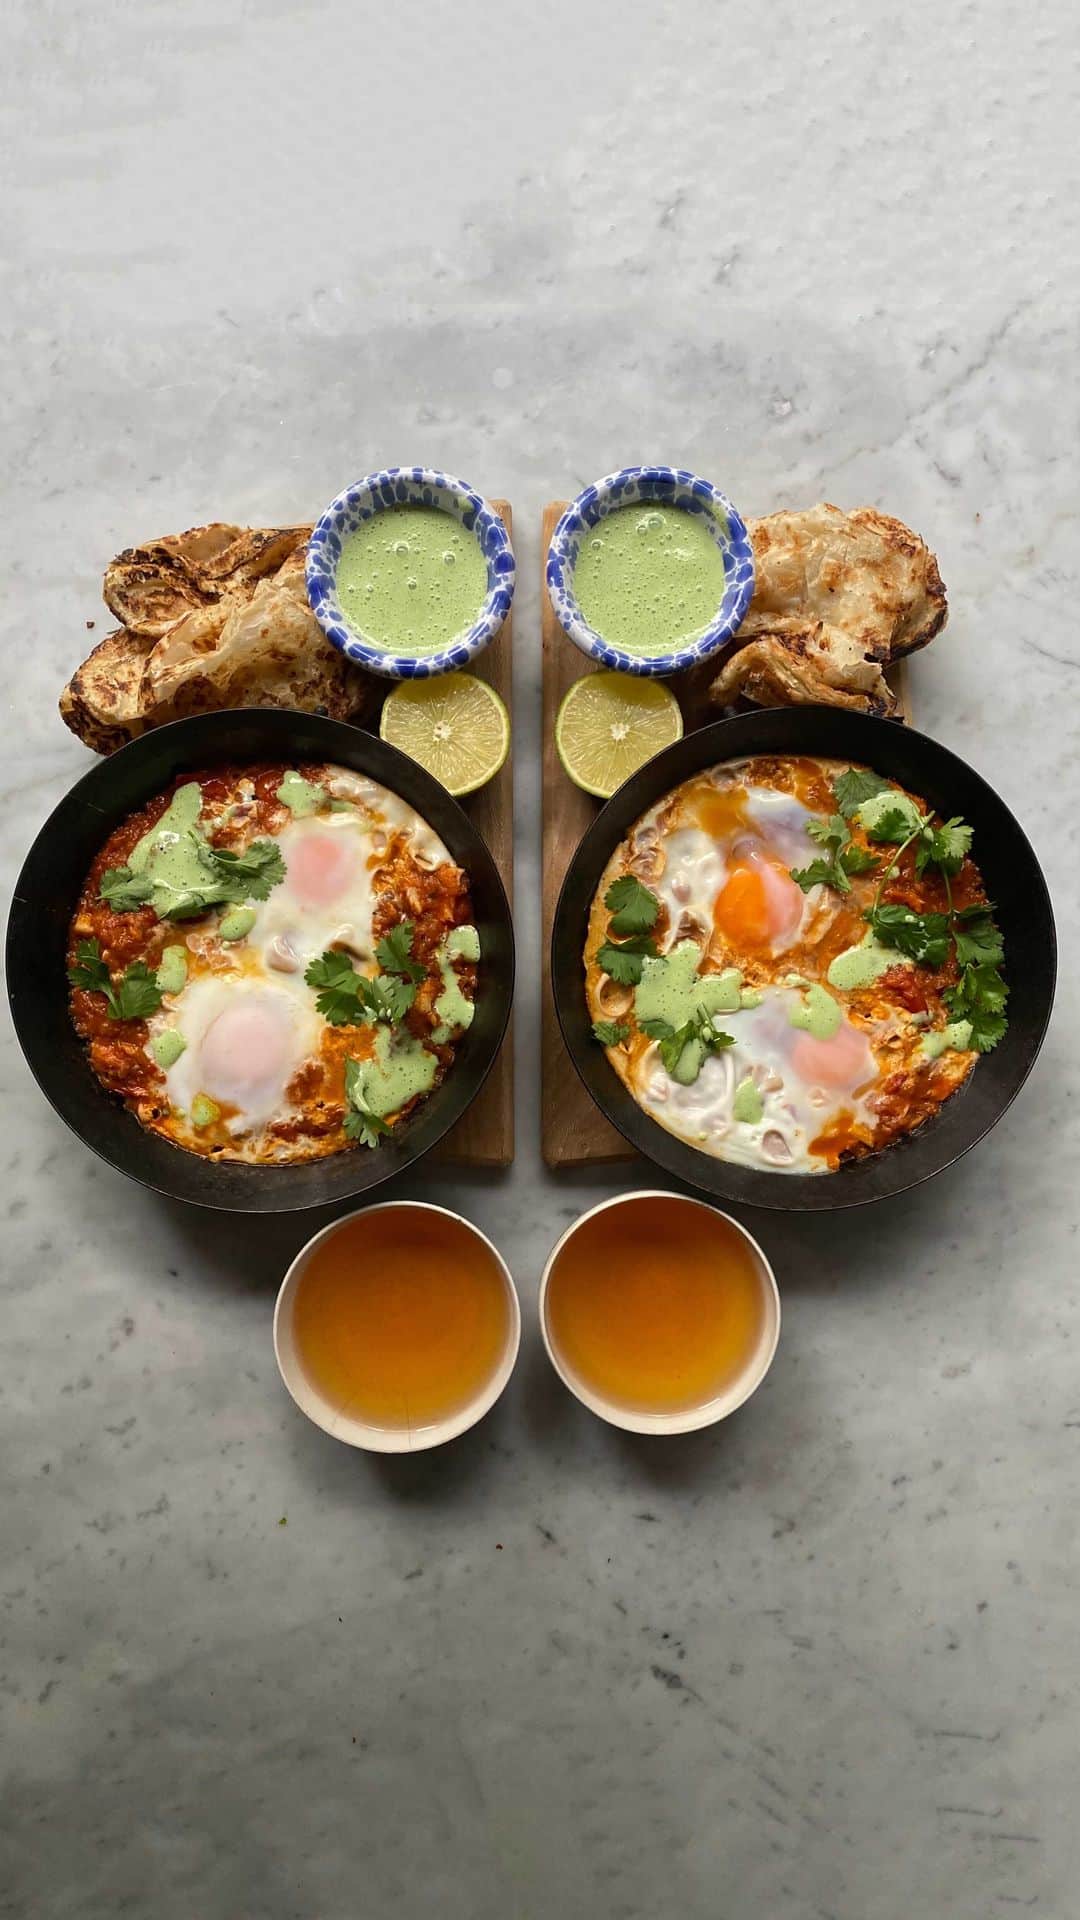 Symmetry Breakfastのインスタグラム：「Takeover time! Hello guys! I’m @mariemitchellchef of @islandsoclub 🎉 taking over Michael’s page for the day. I’m going to show you how to make my saltfish baked eggs with roti and a lime coriander dip. Inspired by ackee and saltfish, the national dish of Jamaica. Follow along on IGTV for the recipe and come over to my page for more details! #islandsocialclub #mariemitchellchef」